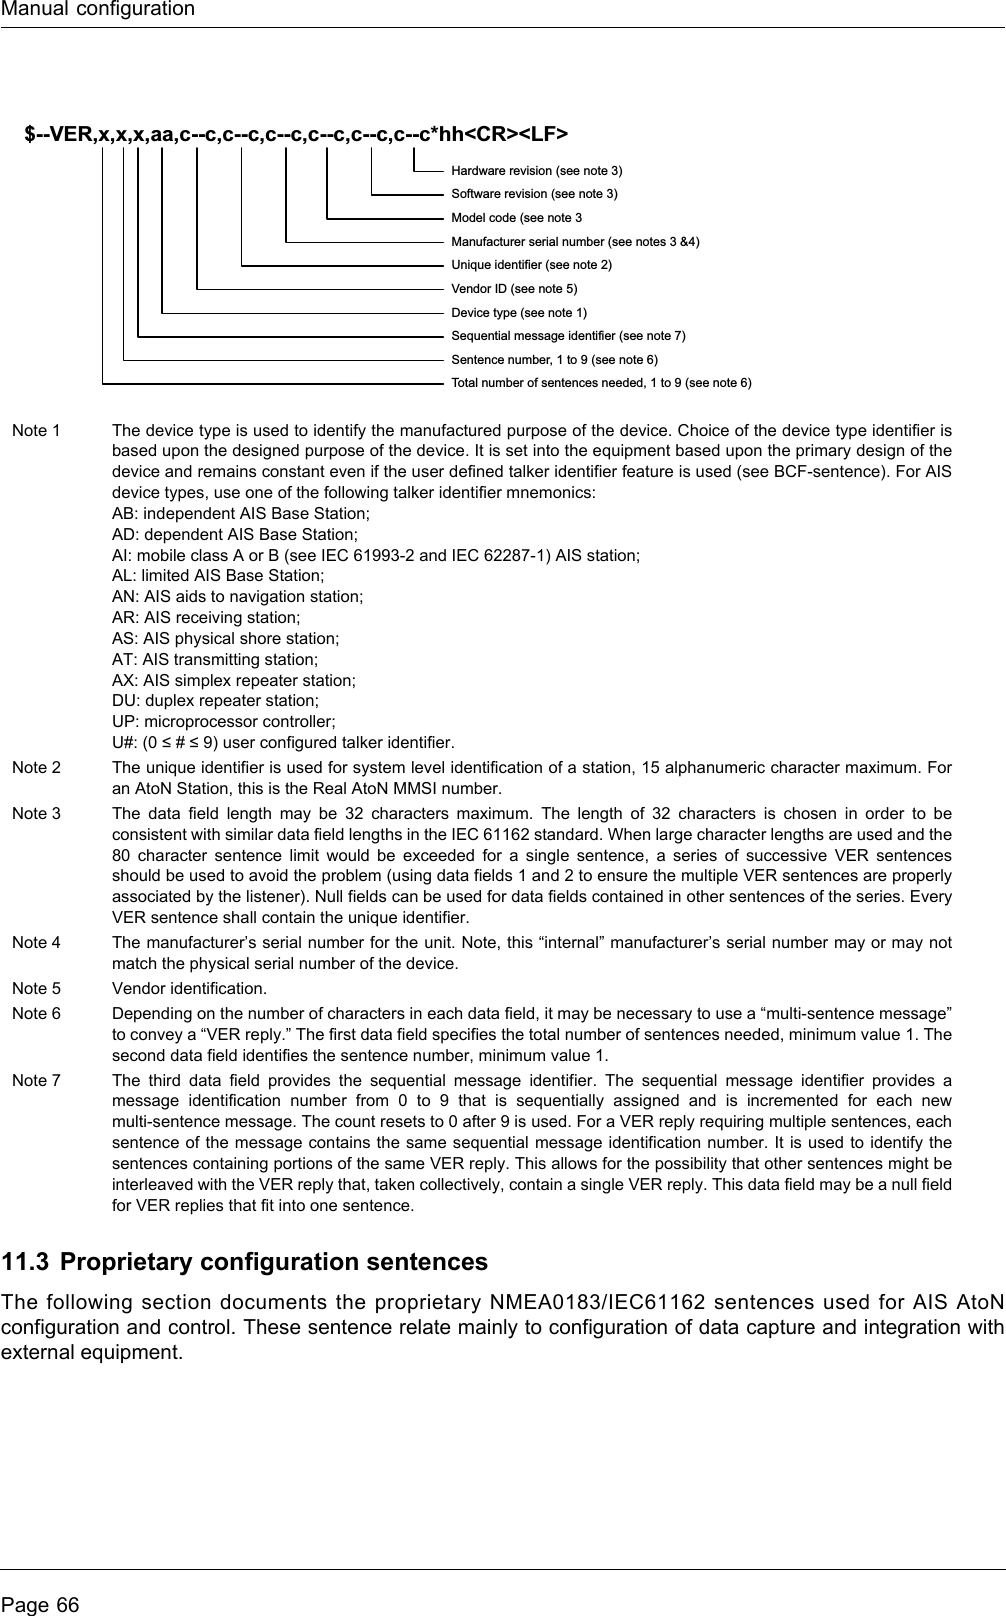 Manual configurationPage 6611.3 Proprietary configuration sentencesThe following section documents the proprietary NMEA0183/IEC61162 sentences used for AIS AtoN configuration and control. These sentence relate mainly to configuration of data capture and integration with external equipment.Note 1 The device type is used to identify the manufactured purpose of the device. Choice of the device type identifier is based upon the designed purpose of the device. It is set into the equipment based upon the primary design of the device and remains constant even if the user defined talker identifier feature is used (see BCF-sentence). For AIS device types, use one of the following talker identifier mnemonics:AB: independent AIS Base Station;AD: dependent AIS Base Station;AI: mobile class A or B (see IEC 61993-2 and IEC 62287-1) AIS station;AL: limited AIS Base Station;AN: AIS aids to navigation station;AR: AIS receiving station;AS: AIS physical shore station;AT: AIS transmitting station;AX: AIS simplex repeater station;DU: duplex repeater station;UP: microprocessor controller;U#: (0 ≤ # ≤ 9) user configured talker identifier.Note 2 The unique identifier is used for system level identification of a station, 15 alphanumeric character maximum. For an AtoN Station, this is the Real AtoN MMSI number.Note 3 The data field length may be 32 characters maximum. The length of 32 characters is chosen in order to be consistent with similar data field lengths in the IEC 61162 standard. When large character lengths are used and the 80 character sentence limit would be exceeded for a single sentence, a series of successive VER sentences should be used to avoid the problem (using data fields 1 and 2 to ensure the multiple VER sentences are properly associated by the listener). Null fields can be used for data fields contained in other sentences of the series. Every VER sentence shall contain the unique identifier.Note 4 The manufacturer’s serial number for the unit. Note, this “internal” manufacturer’s serial number may or may not match the physical serial number of the device.Note 5 Vendor identification.Note 6 Depending on the number of characters in each data field, it may be necessary to use a “multi-sentence message” to convey a “VER reply.” The first data field specifies the total number of sentences needed, minimum value 1. The second data field identifies the sentence number, minimum value 1. Note 7 The third data field provides the sequential message identifier. The sequential message identifier provides a message identification number from 0 to 9 that is sequentially assigned and is incremented for each new multi-sentence message. The count resets to 0 after 9 is used. For a VER reply requiring multiple sentences, each sentence of the message contains the same sequential message identification number. It is used to identify the sentences containing portions of the same VER reply. This allows for the possibility that other sentences might be interleaved with the VER reply that, taken collectively, contain a single VER reply. This data field may be a null field for VER replies that fit into one sentence.$--VER,x,x,x,aa,c--c,c--c,c--c,c--c,c--c,c--c*hh&lt;CR&gt;&lt;LF&gt;Hardware revision (see note 3)Software revision (see note 3)Model code (see note 3Manufacturer serial number (see notes 3 &amp;4)Unique identifier (see note 2)Vendor ID (see note 5)Device type (see note 1)Sequential message identifier (see note 7)Sentence number, 1 to 9 (see note 6)Total number of sentences needed, 1 to 9 (see note 6)